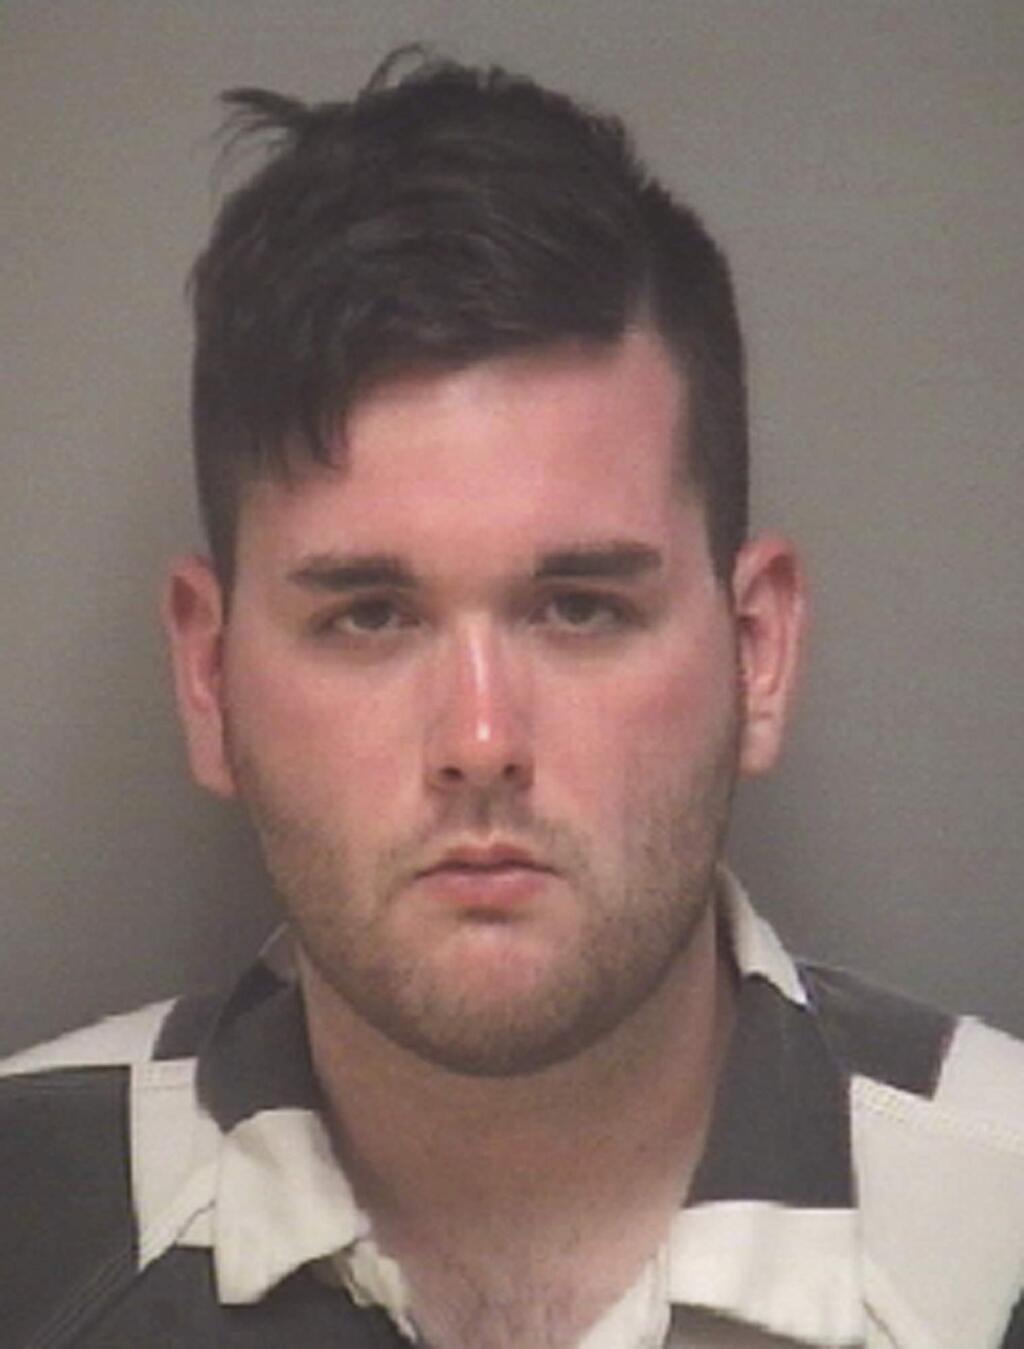 This photo provided by the Albemarle-Charlottesville Regional Jail shows James Alex Fields Jr., who was charged with second-degree murder and other counts after authorities say he rammed his car into a crowd of protesters Saturday, Aug. 12, 2017, in Charlottesville, Va., where a white supremacist rally took place. Fields has a preliminary court hearing in Charlottesville on Thursday, Dec. 14, 2017. (Albemarle-Charlottesville Regional Jail via AP)